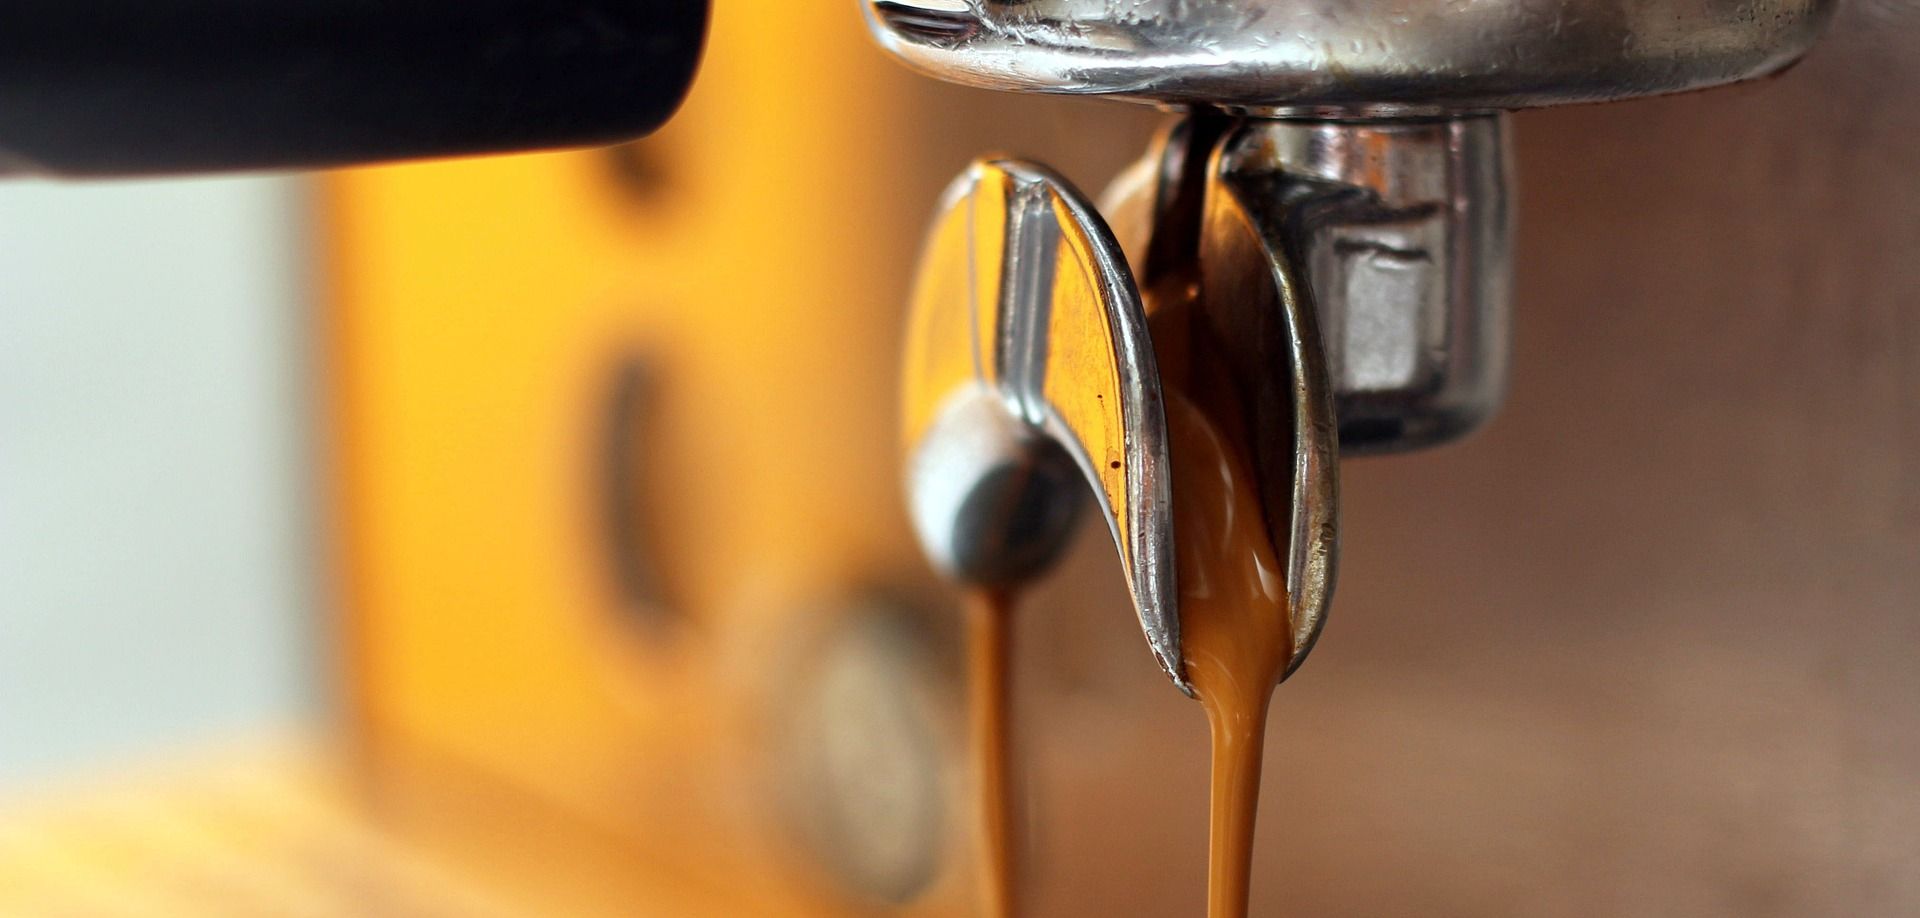 Single it Out OR Double Date for Espresso Extraction? - BrewRatio